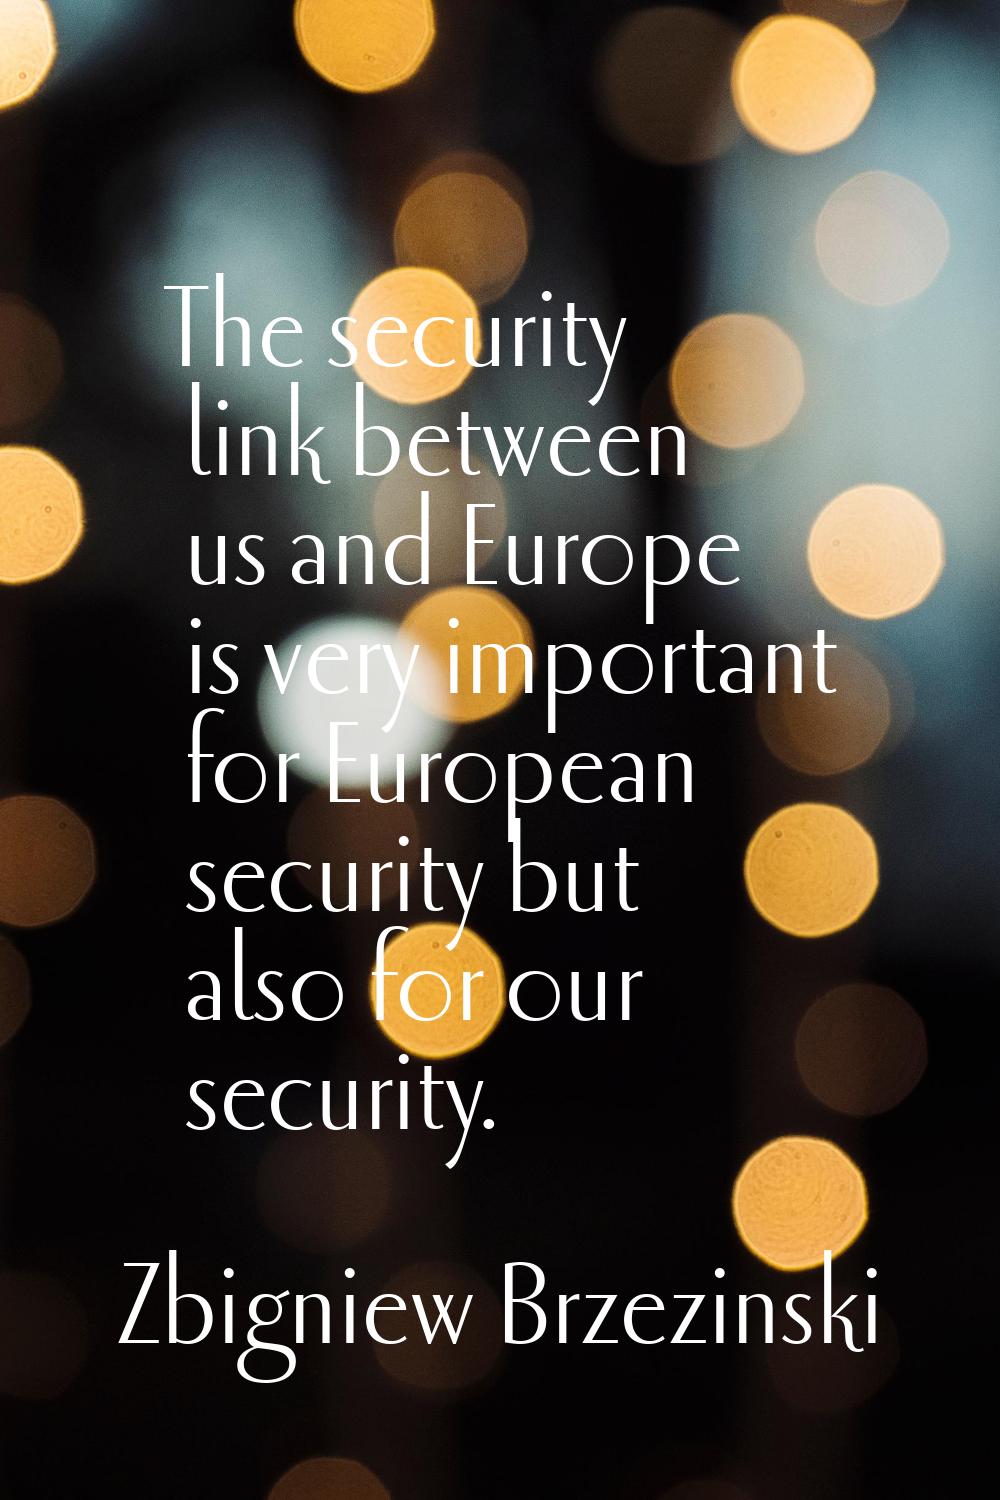 The security link between us and Europe is very important for European security but also for our se